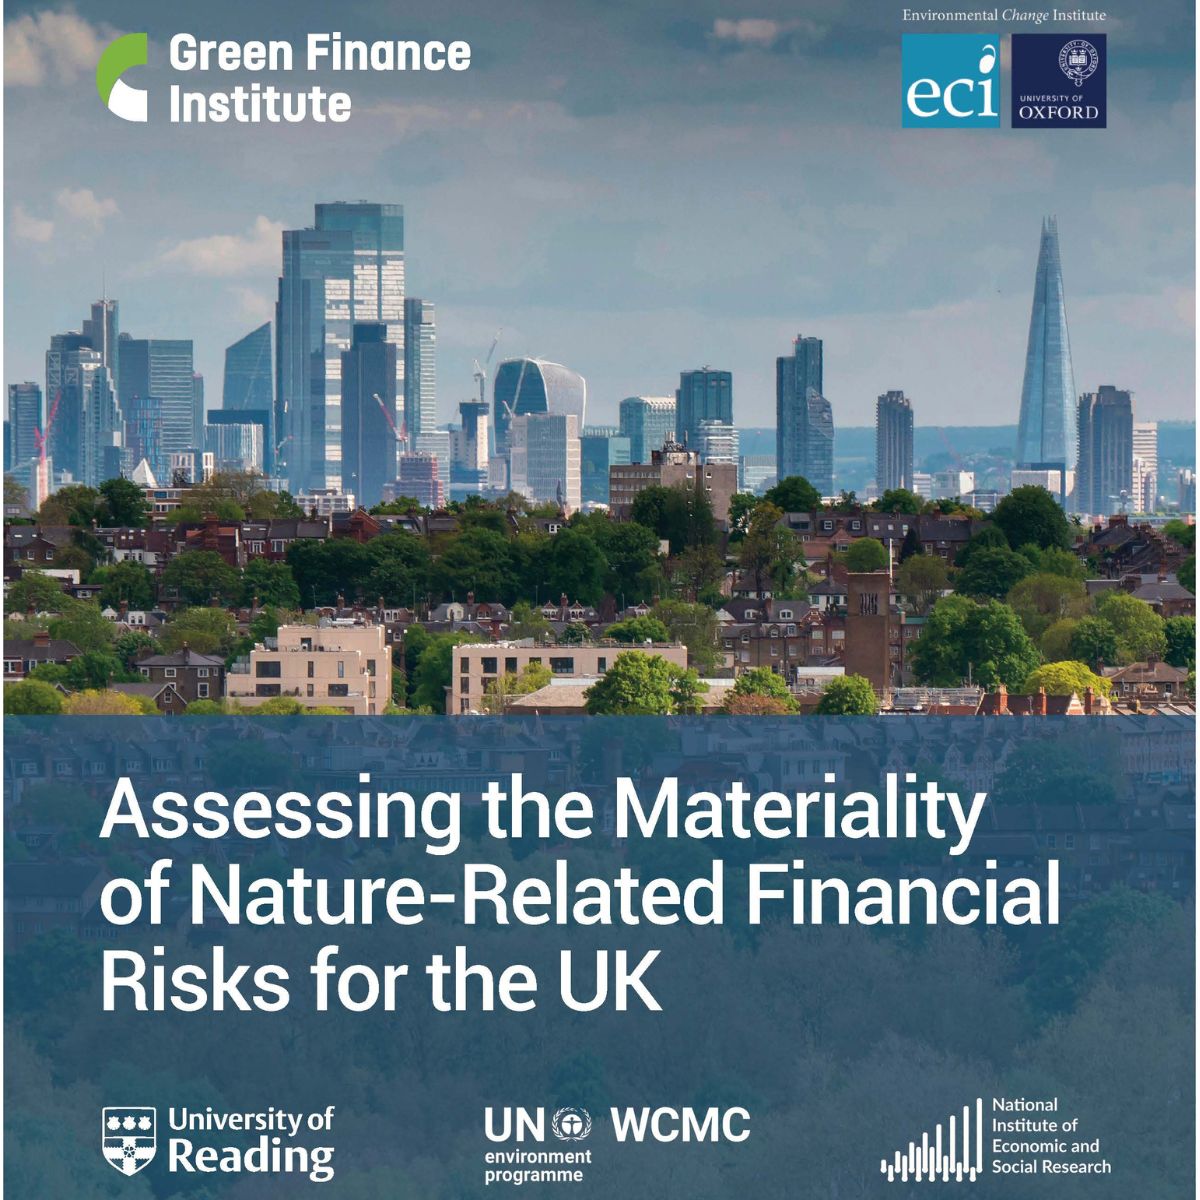 UNEP-WCMC nature economists have contributed to first-of-its-kind analysis led by @GFI_green, to quantify the impact of nature degradation on the UK’s economy by assessing the nature-related dependencies of financial institutions, using the ENCORE tool🛠️: tinyurl.com/39z3nm2y